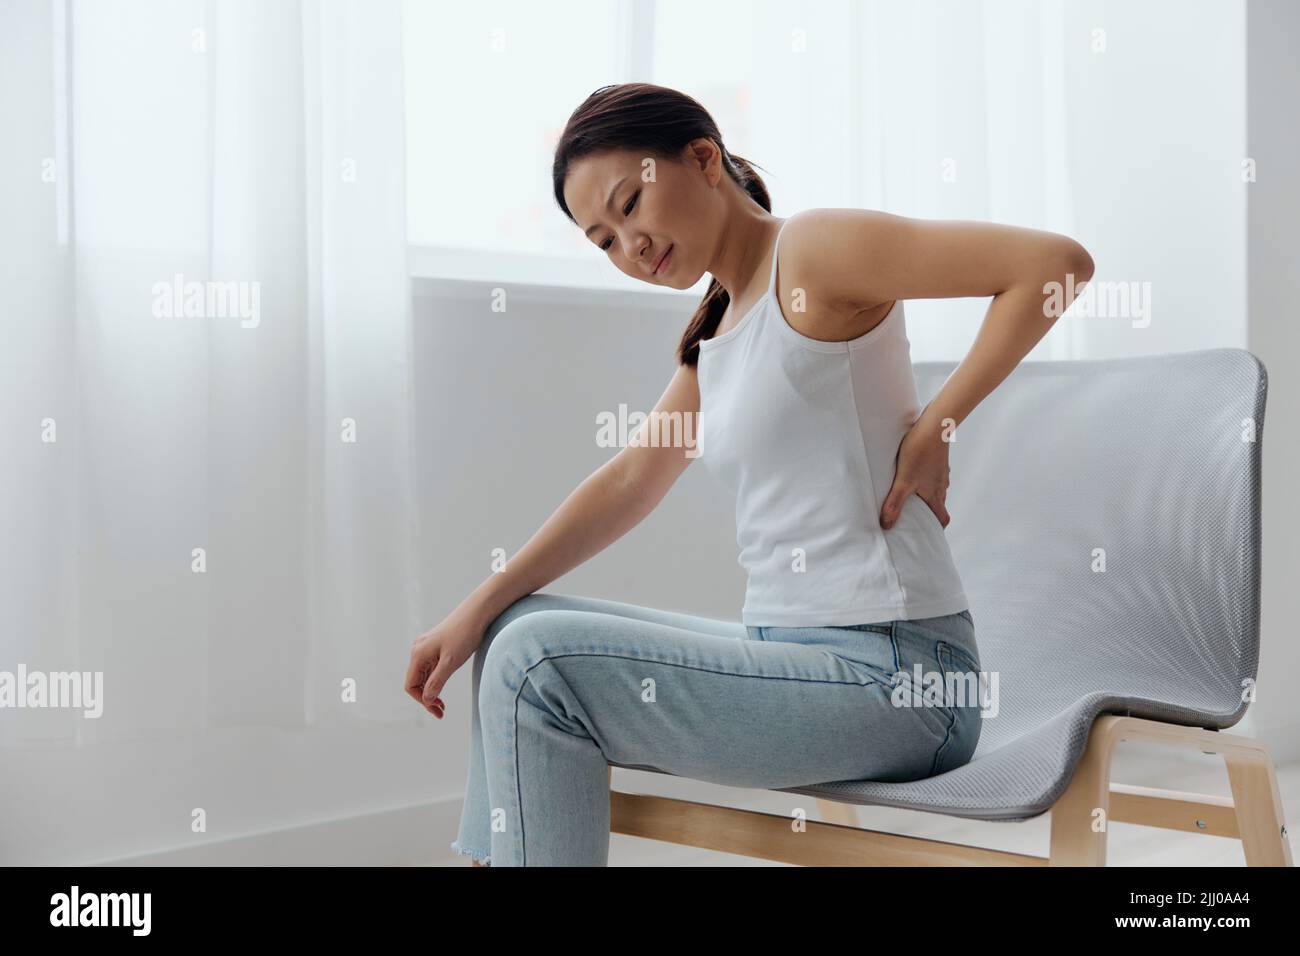 https://c8.alamy.com/comp/2JJ0AA4/suffering-from-scoliosis-osteochondrosis-after-long-study-pretty-young-asian-woman-feel-hurt-joint-back-pain-laptop-in-incorrect-posture-sit-on-chair-2JJ0AA4.jpg